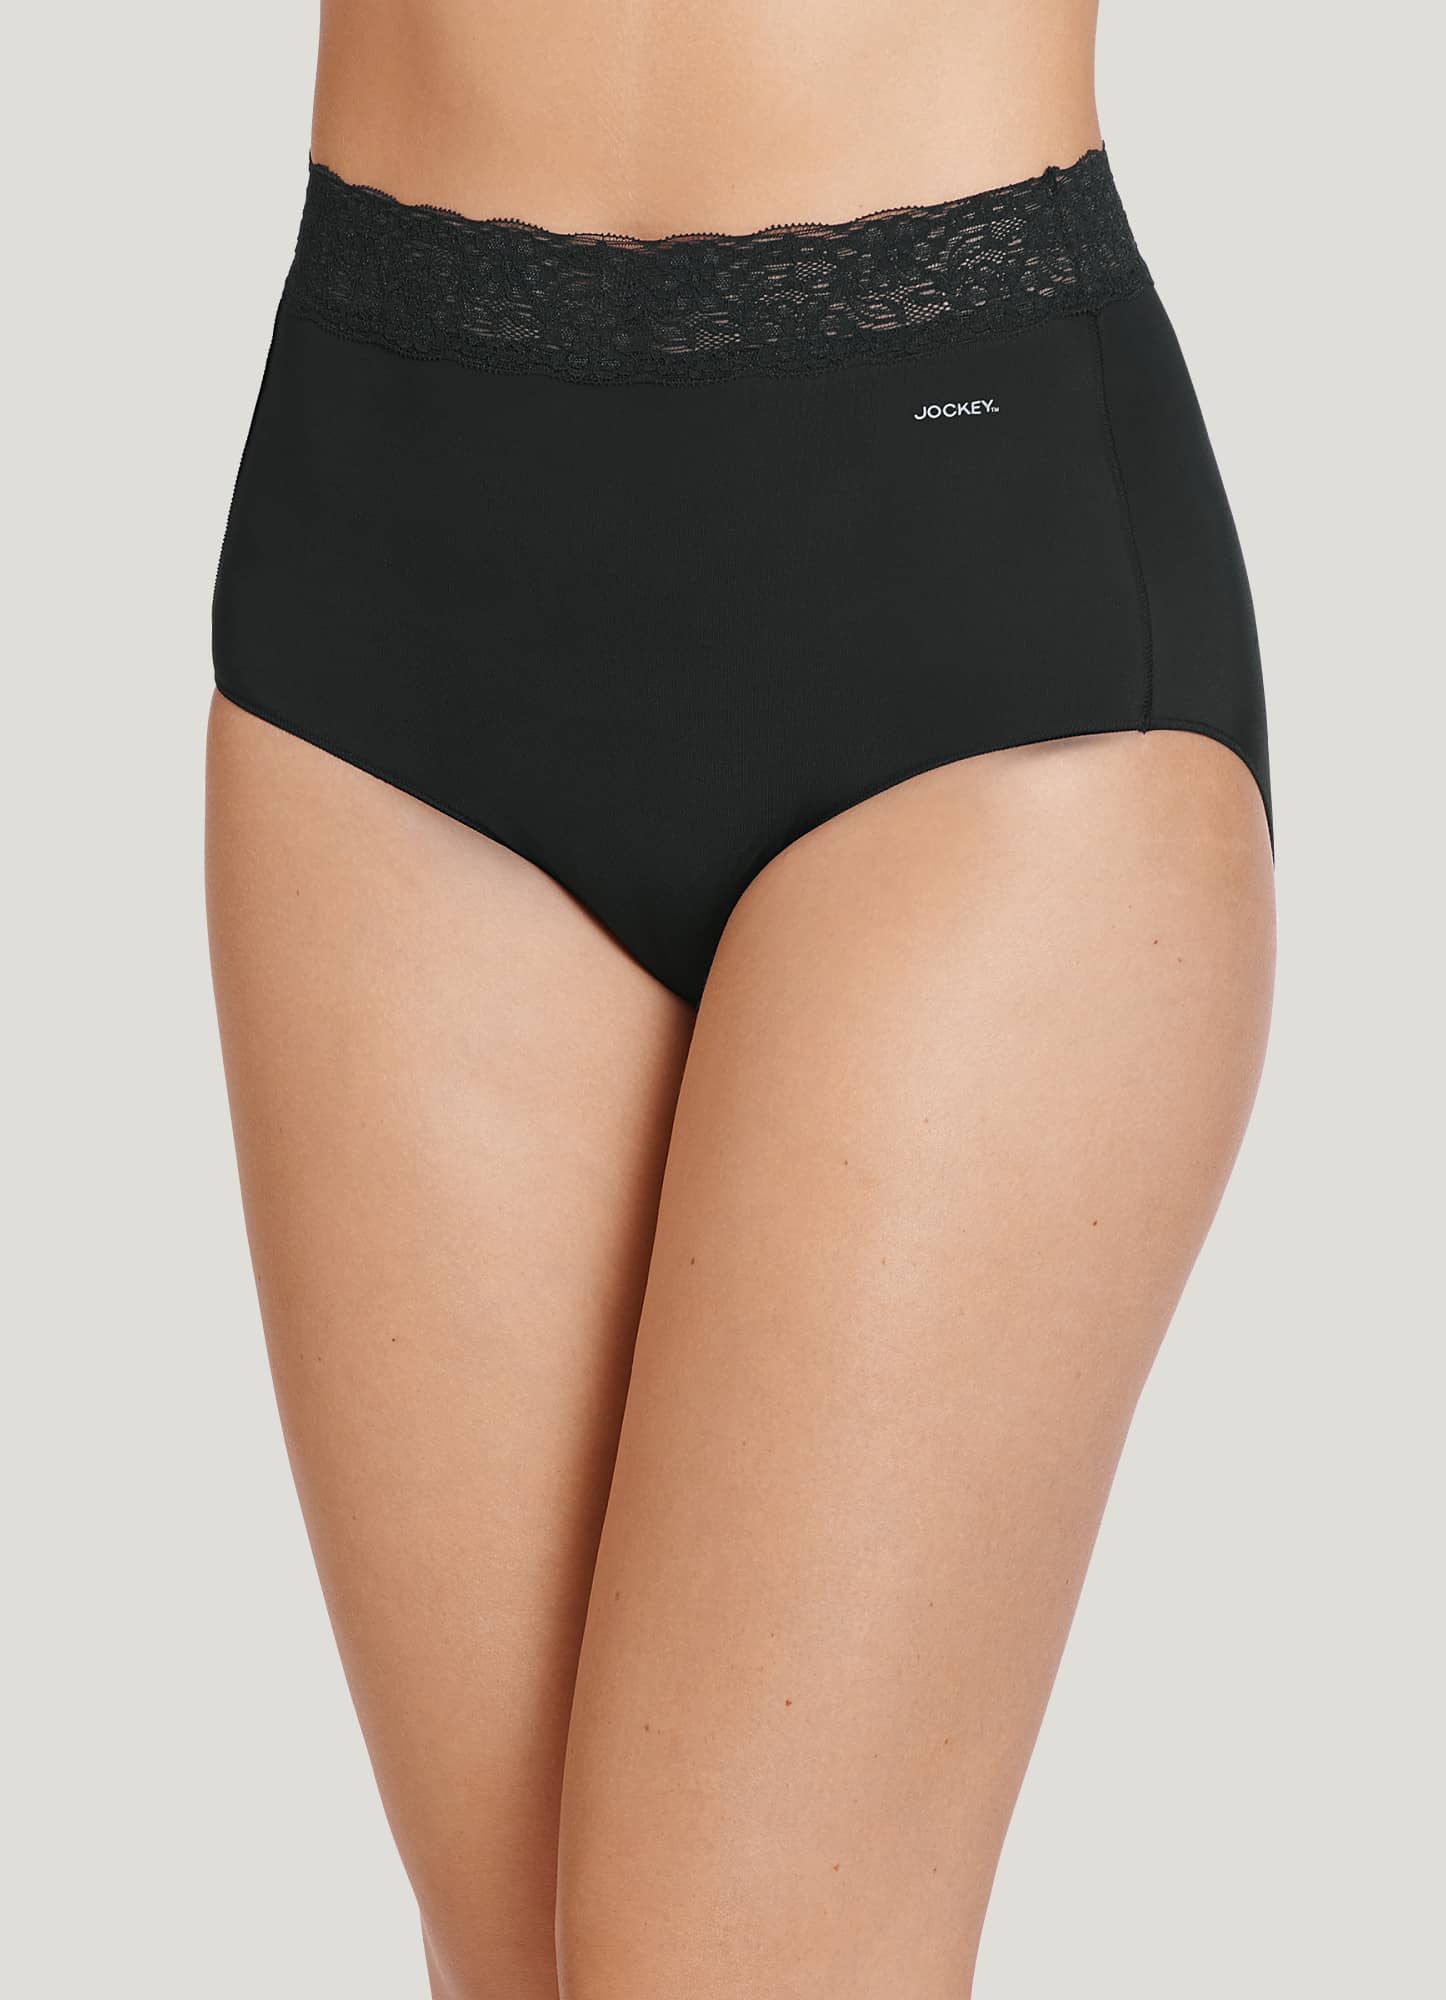 Tommy John Women's Underwear, Boyshort Lace Panties, Second Skin Fabric,  Black, Small, 3 Pack at  Women's Clothing store